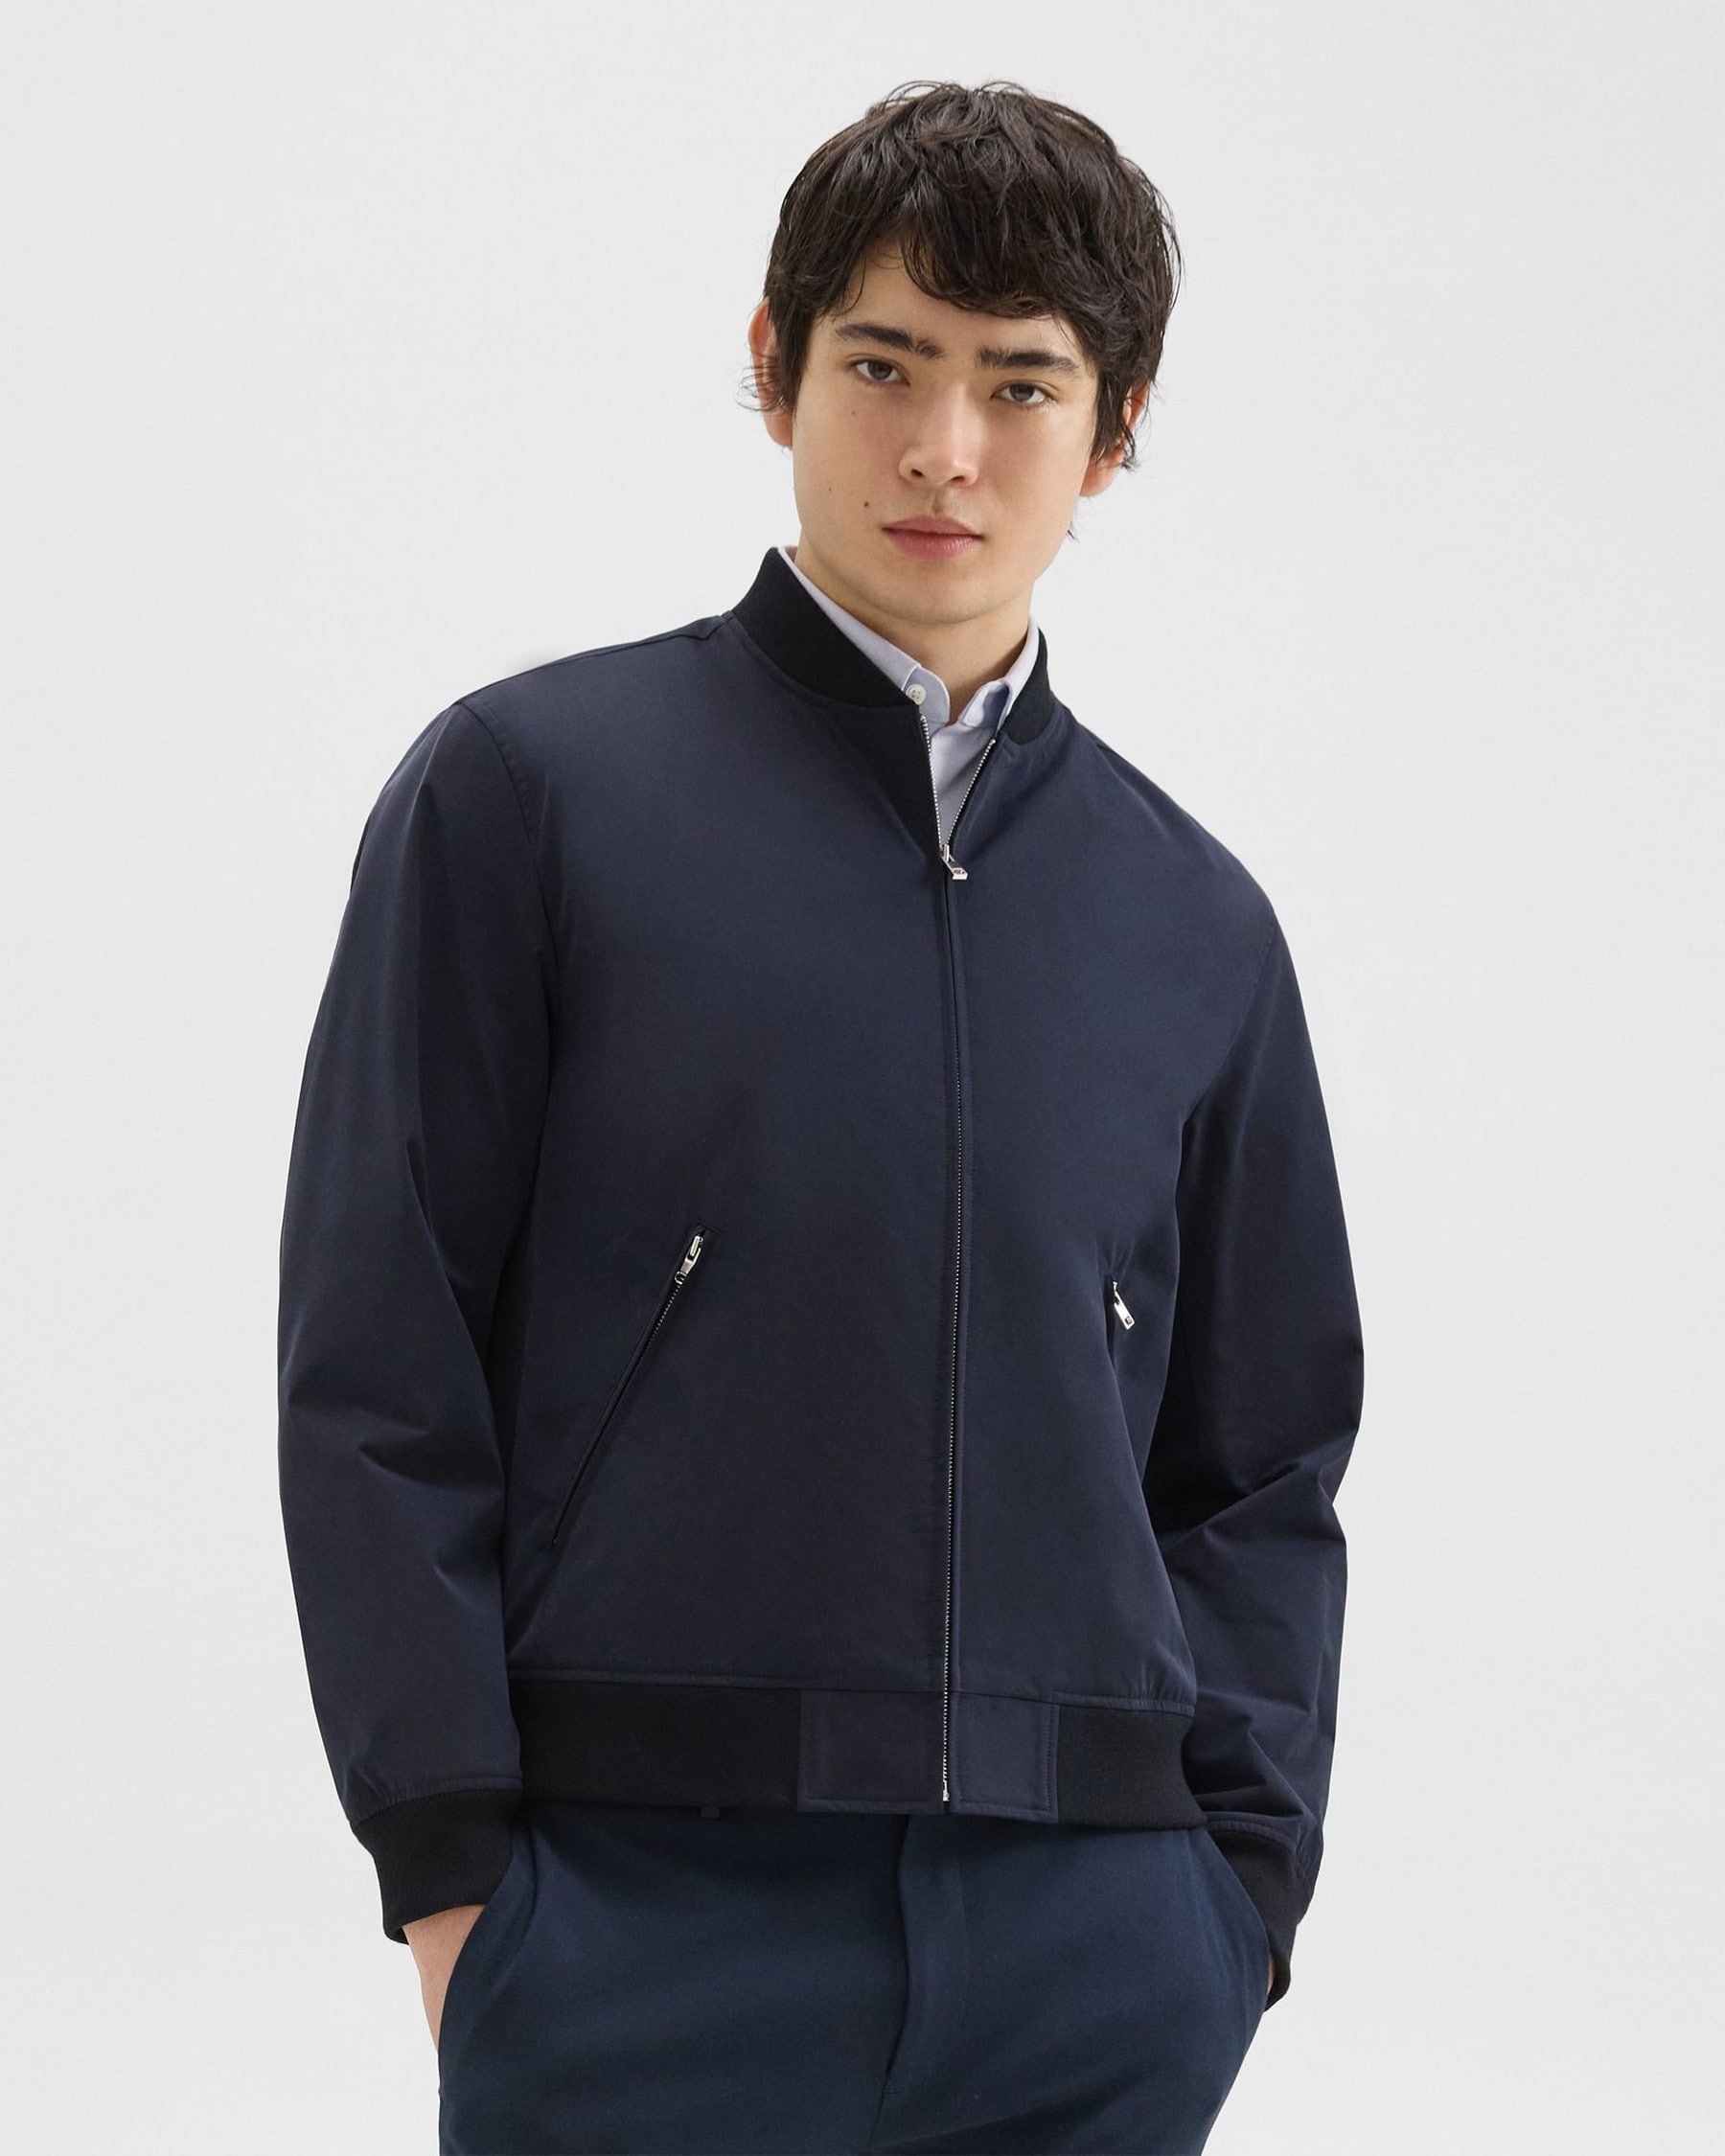 Tailored Bomber Jacket in Foundation Twill